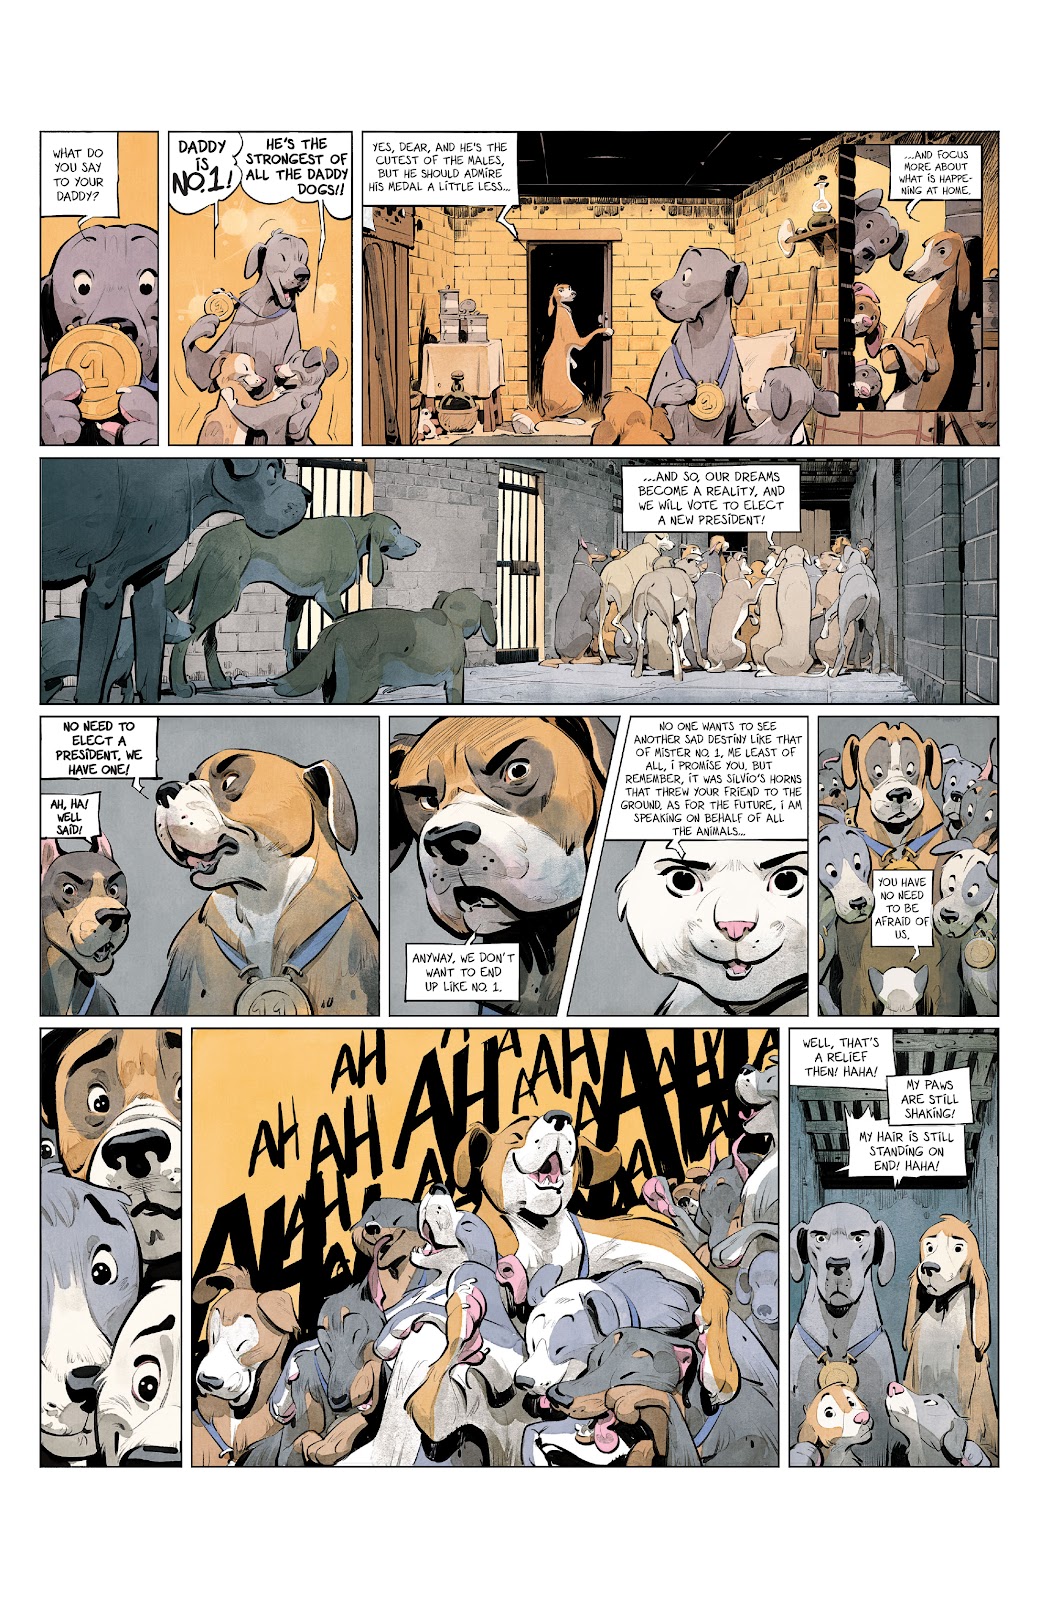 Animal Castle Vol. 2 issue 1 - Page 22